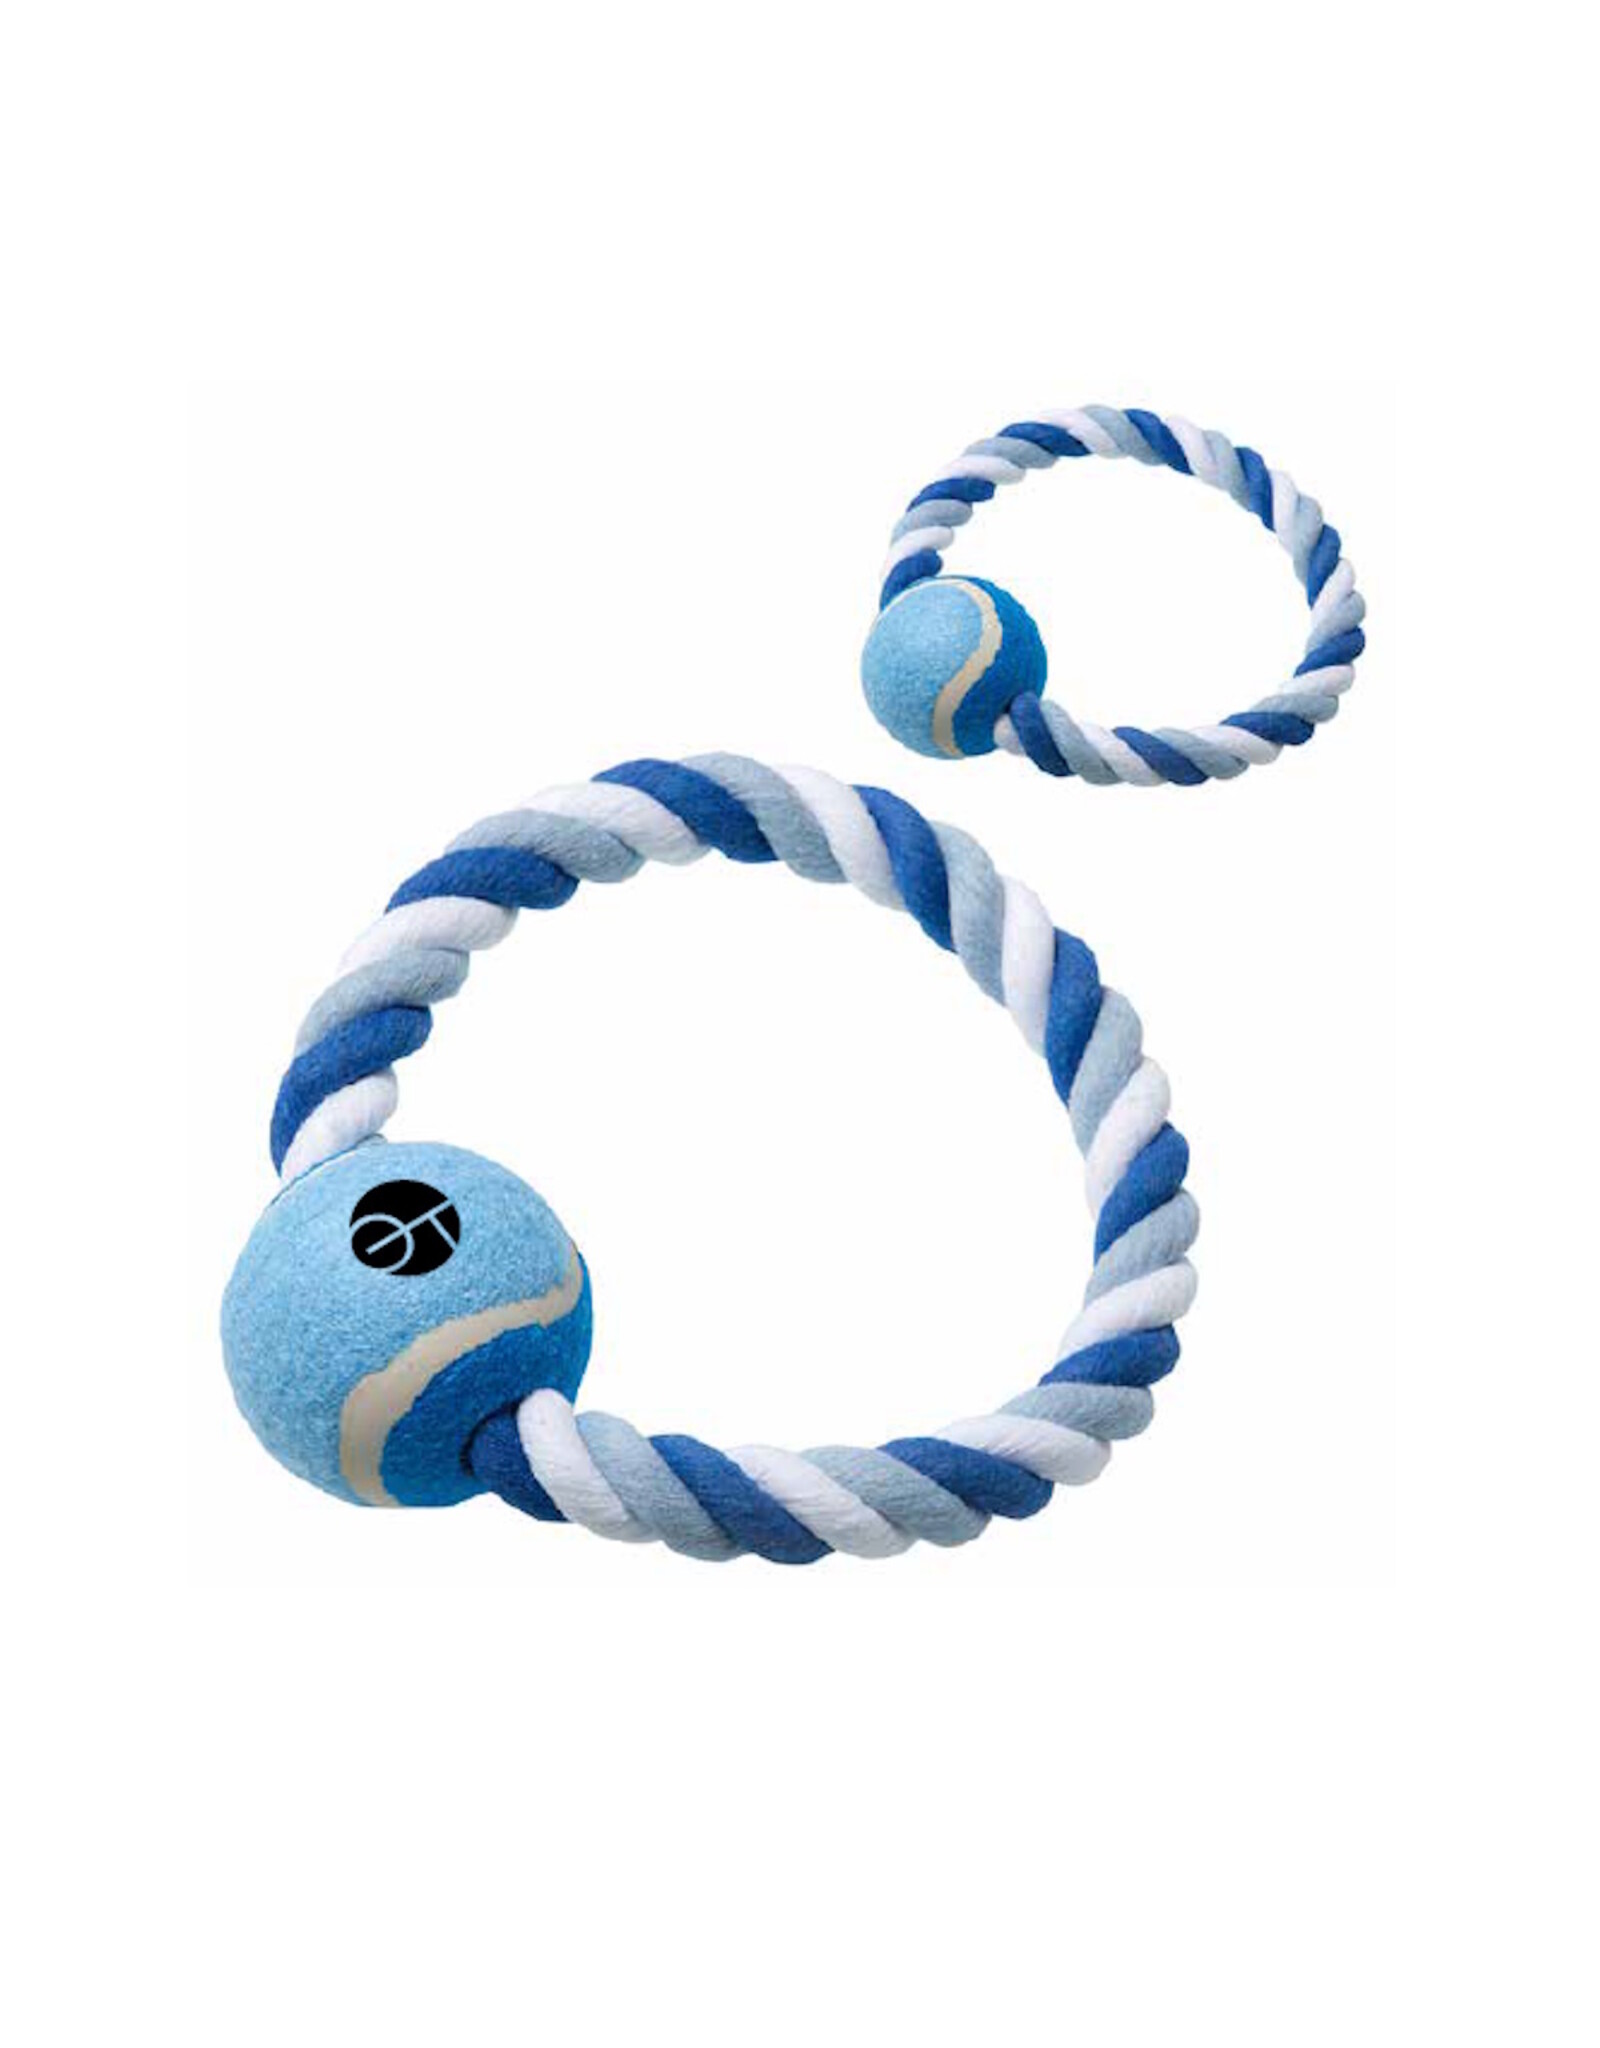 Rope Ring & Ball Pet Toy